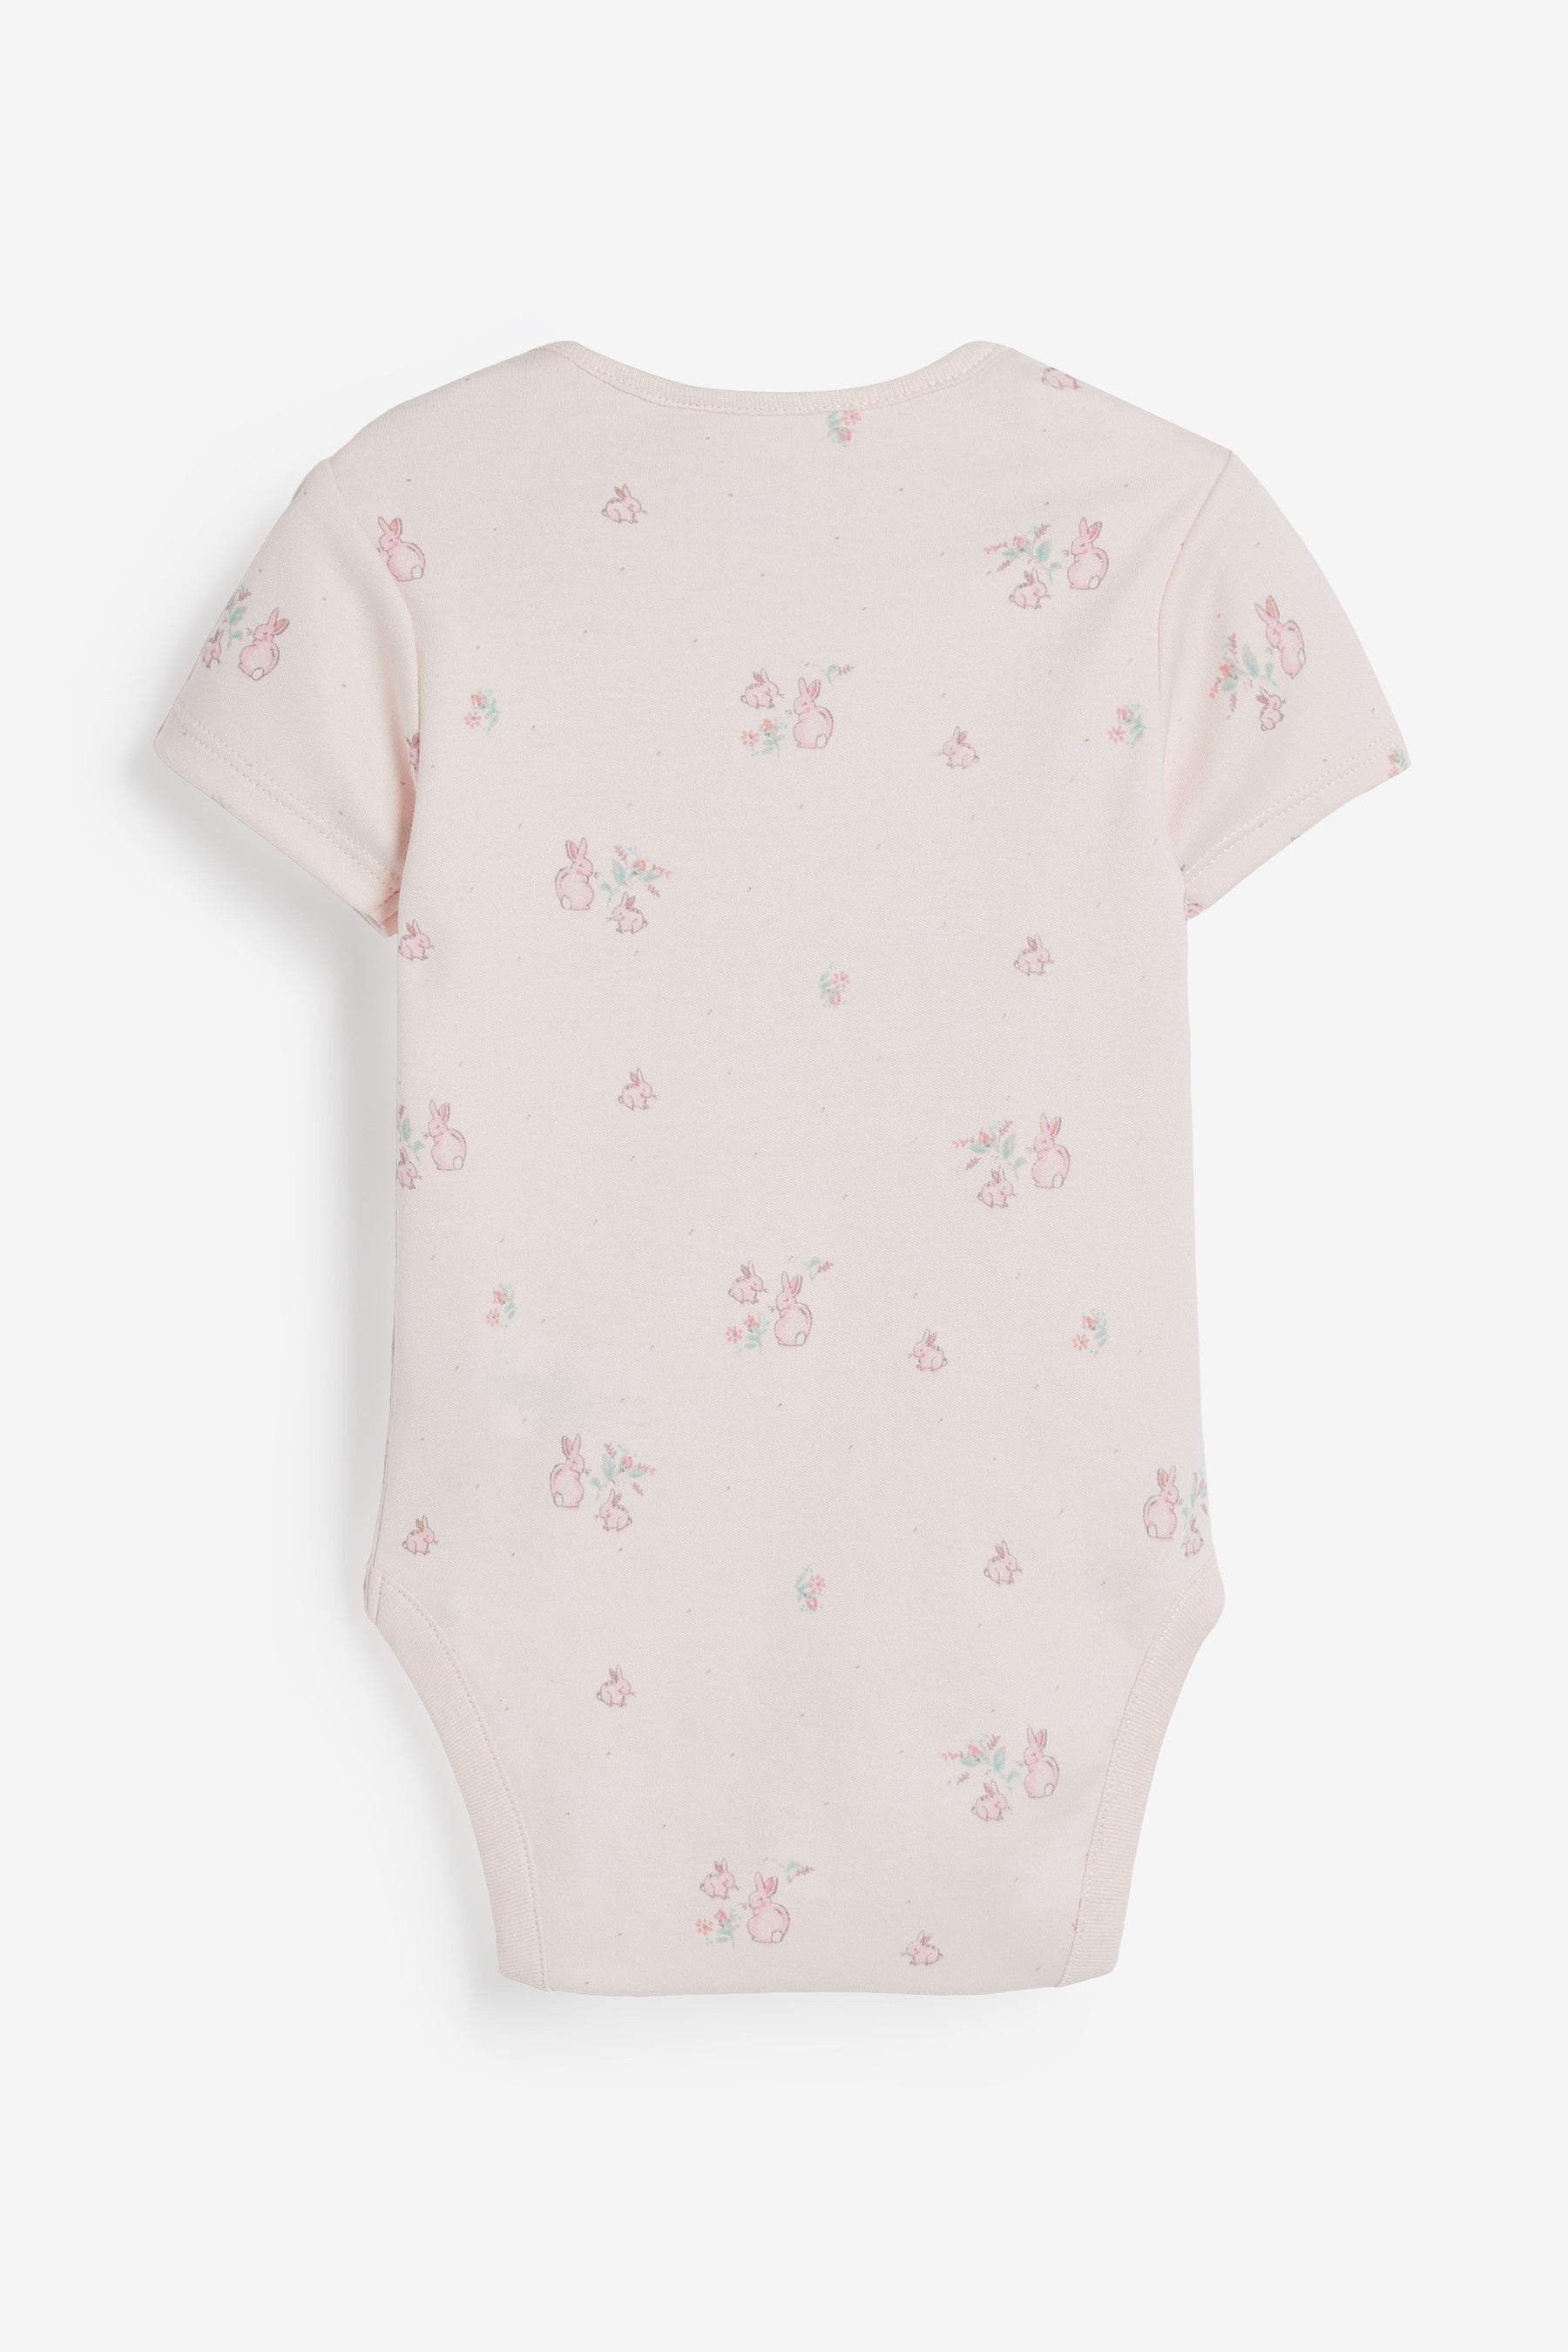 Pink 4 Pack Delicate Bunny Short Sleeved Bodysuits (0mths-3yrs)